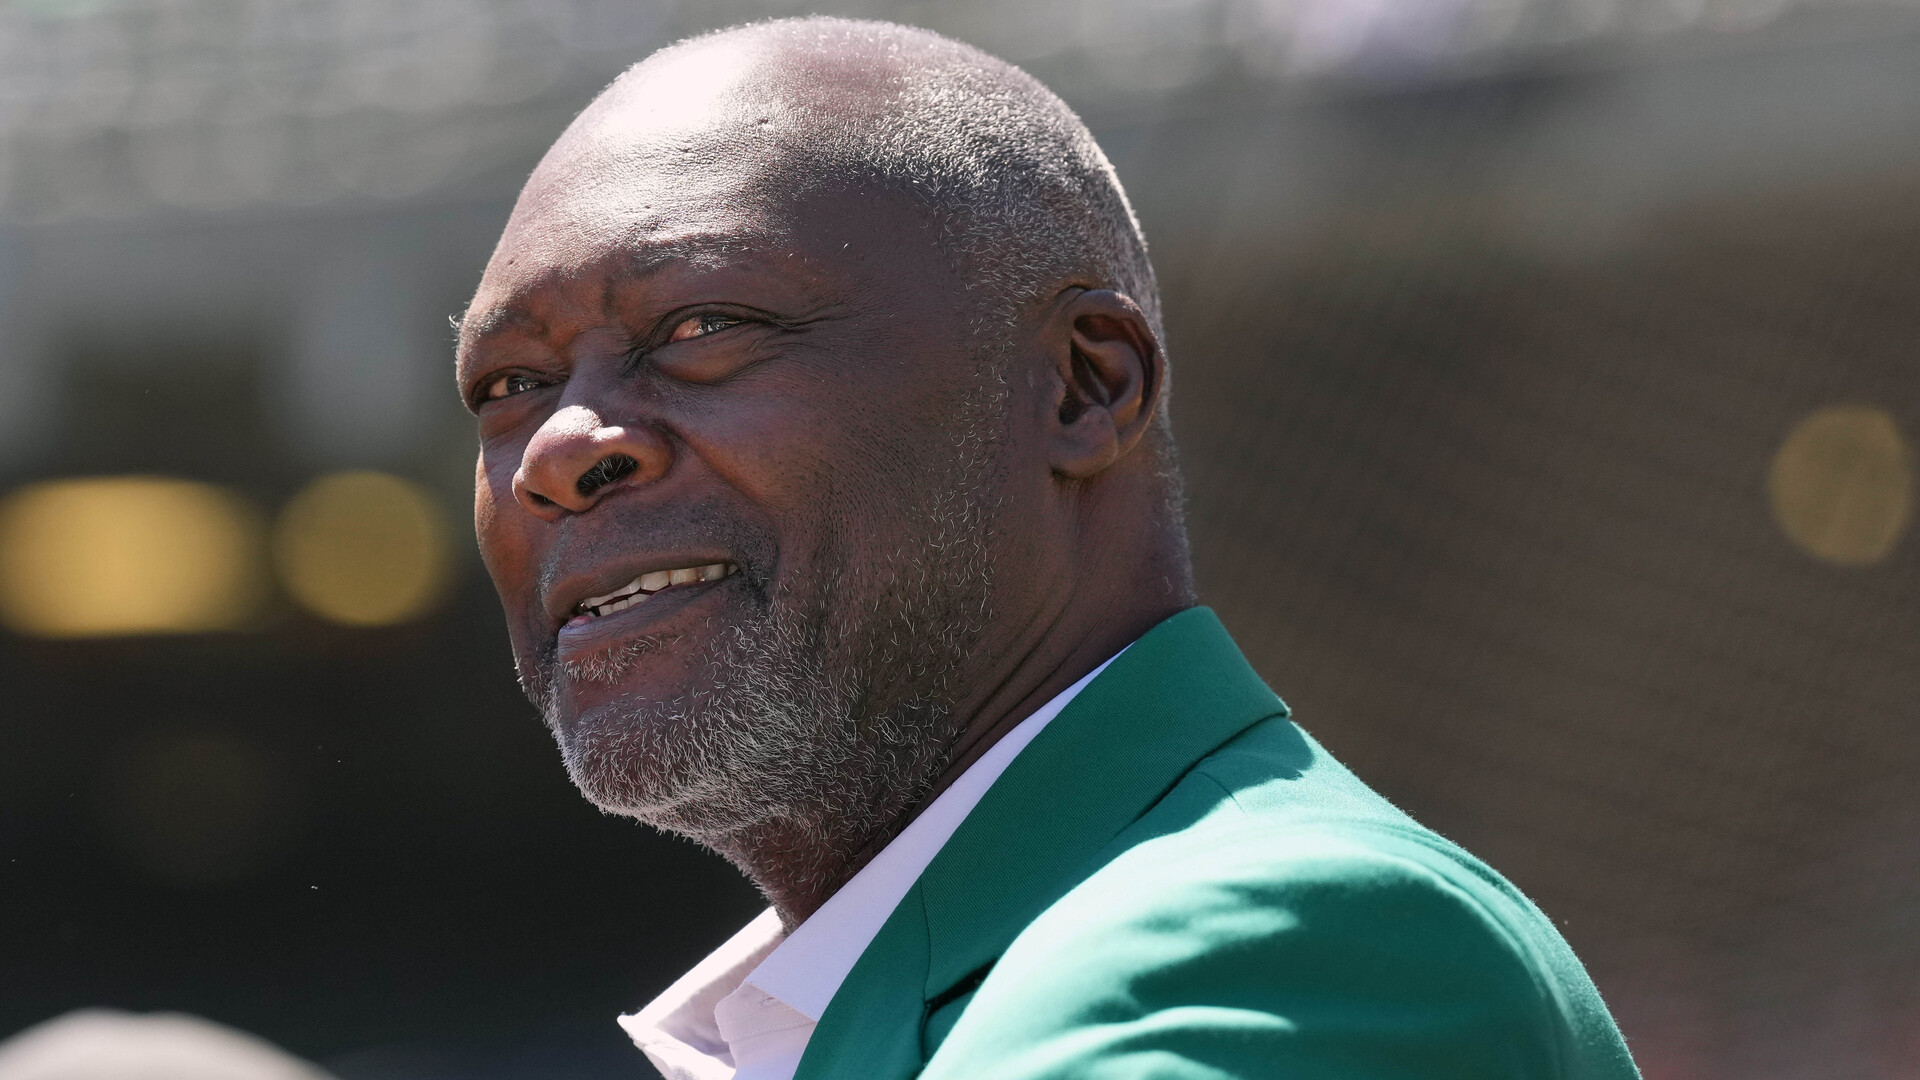 Former Oakland A's ace Dave Stewart gets emotional over honor